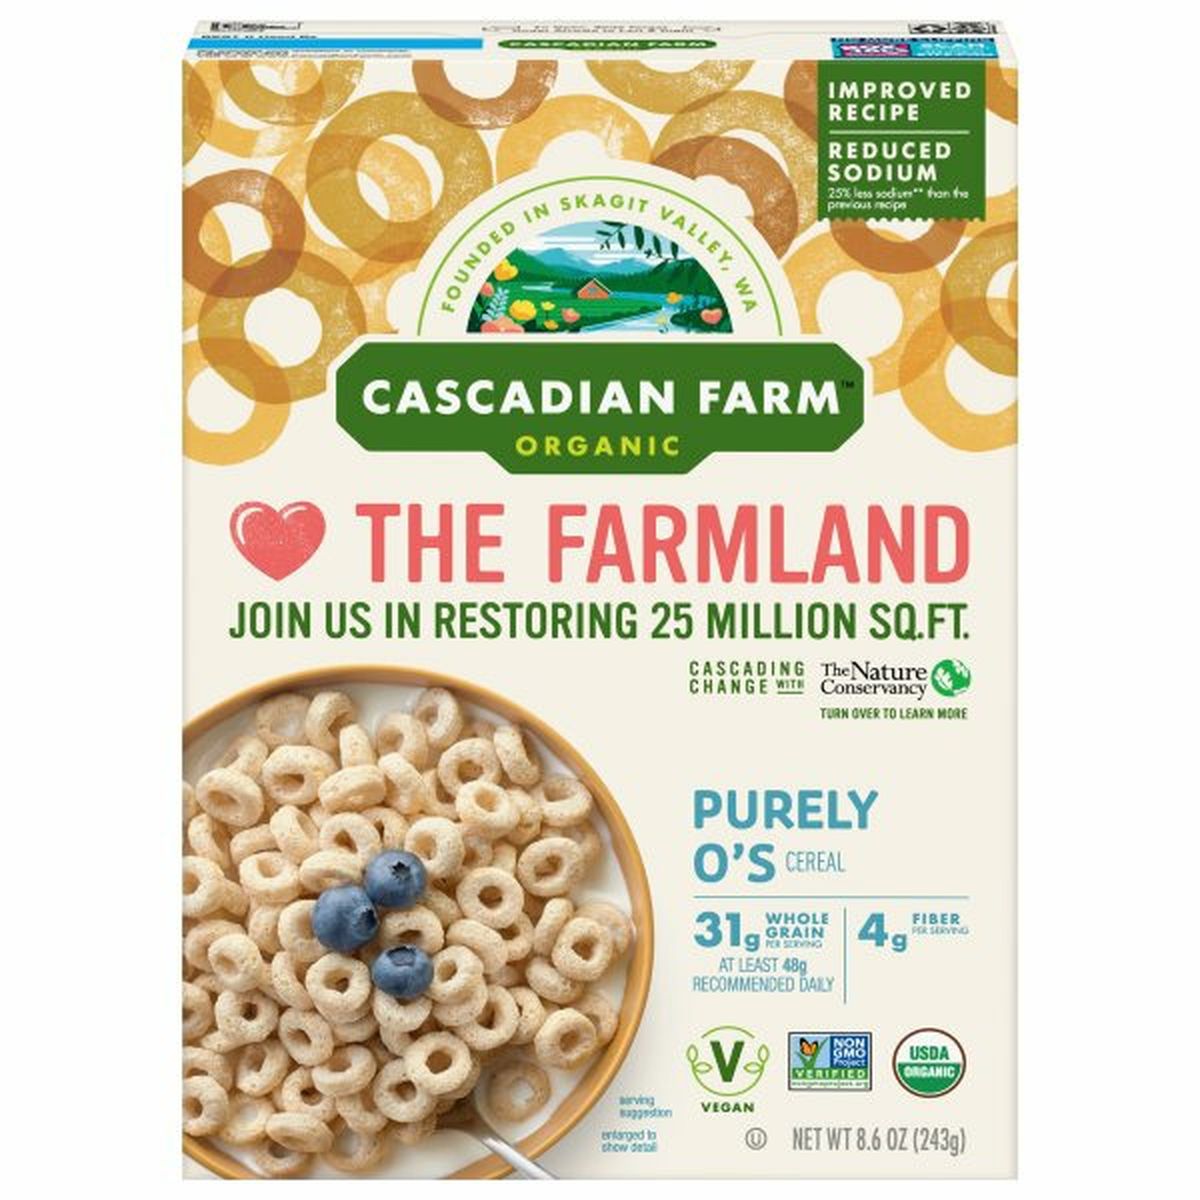 Calories in Cascadian Farm Cereal, Organic, Purely O's